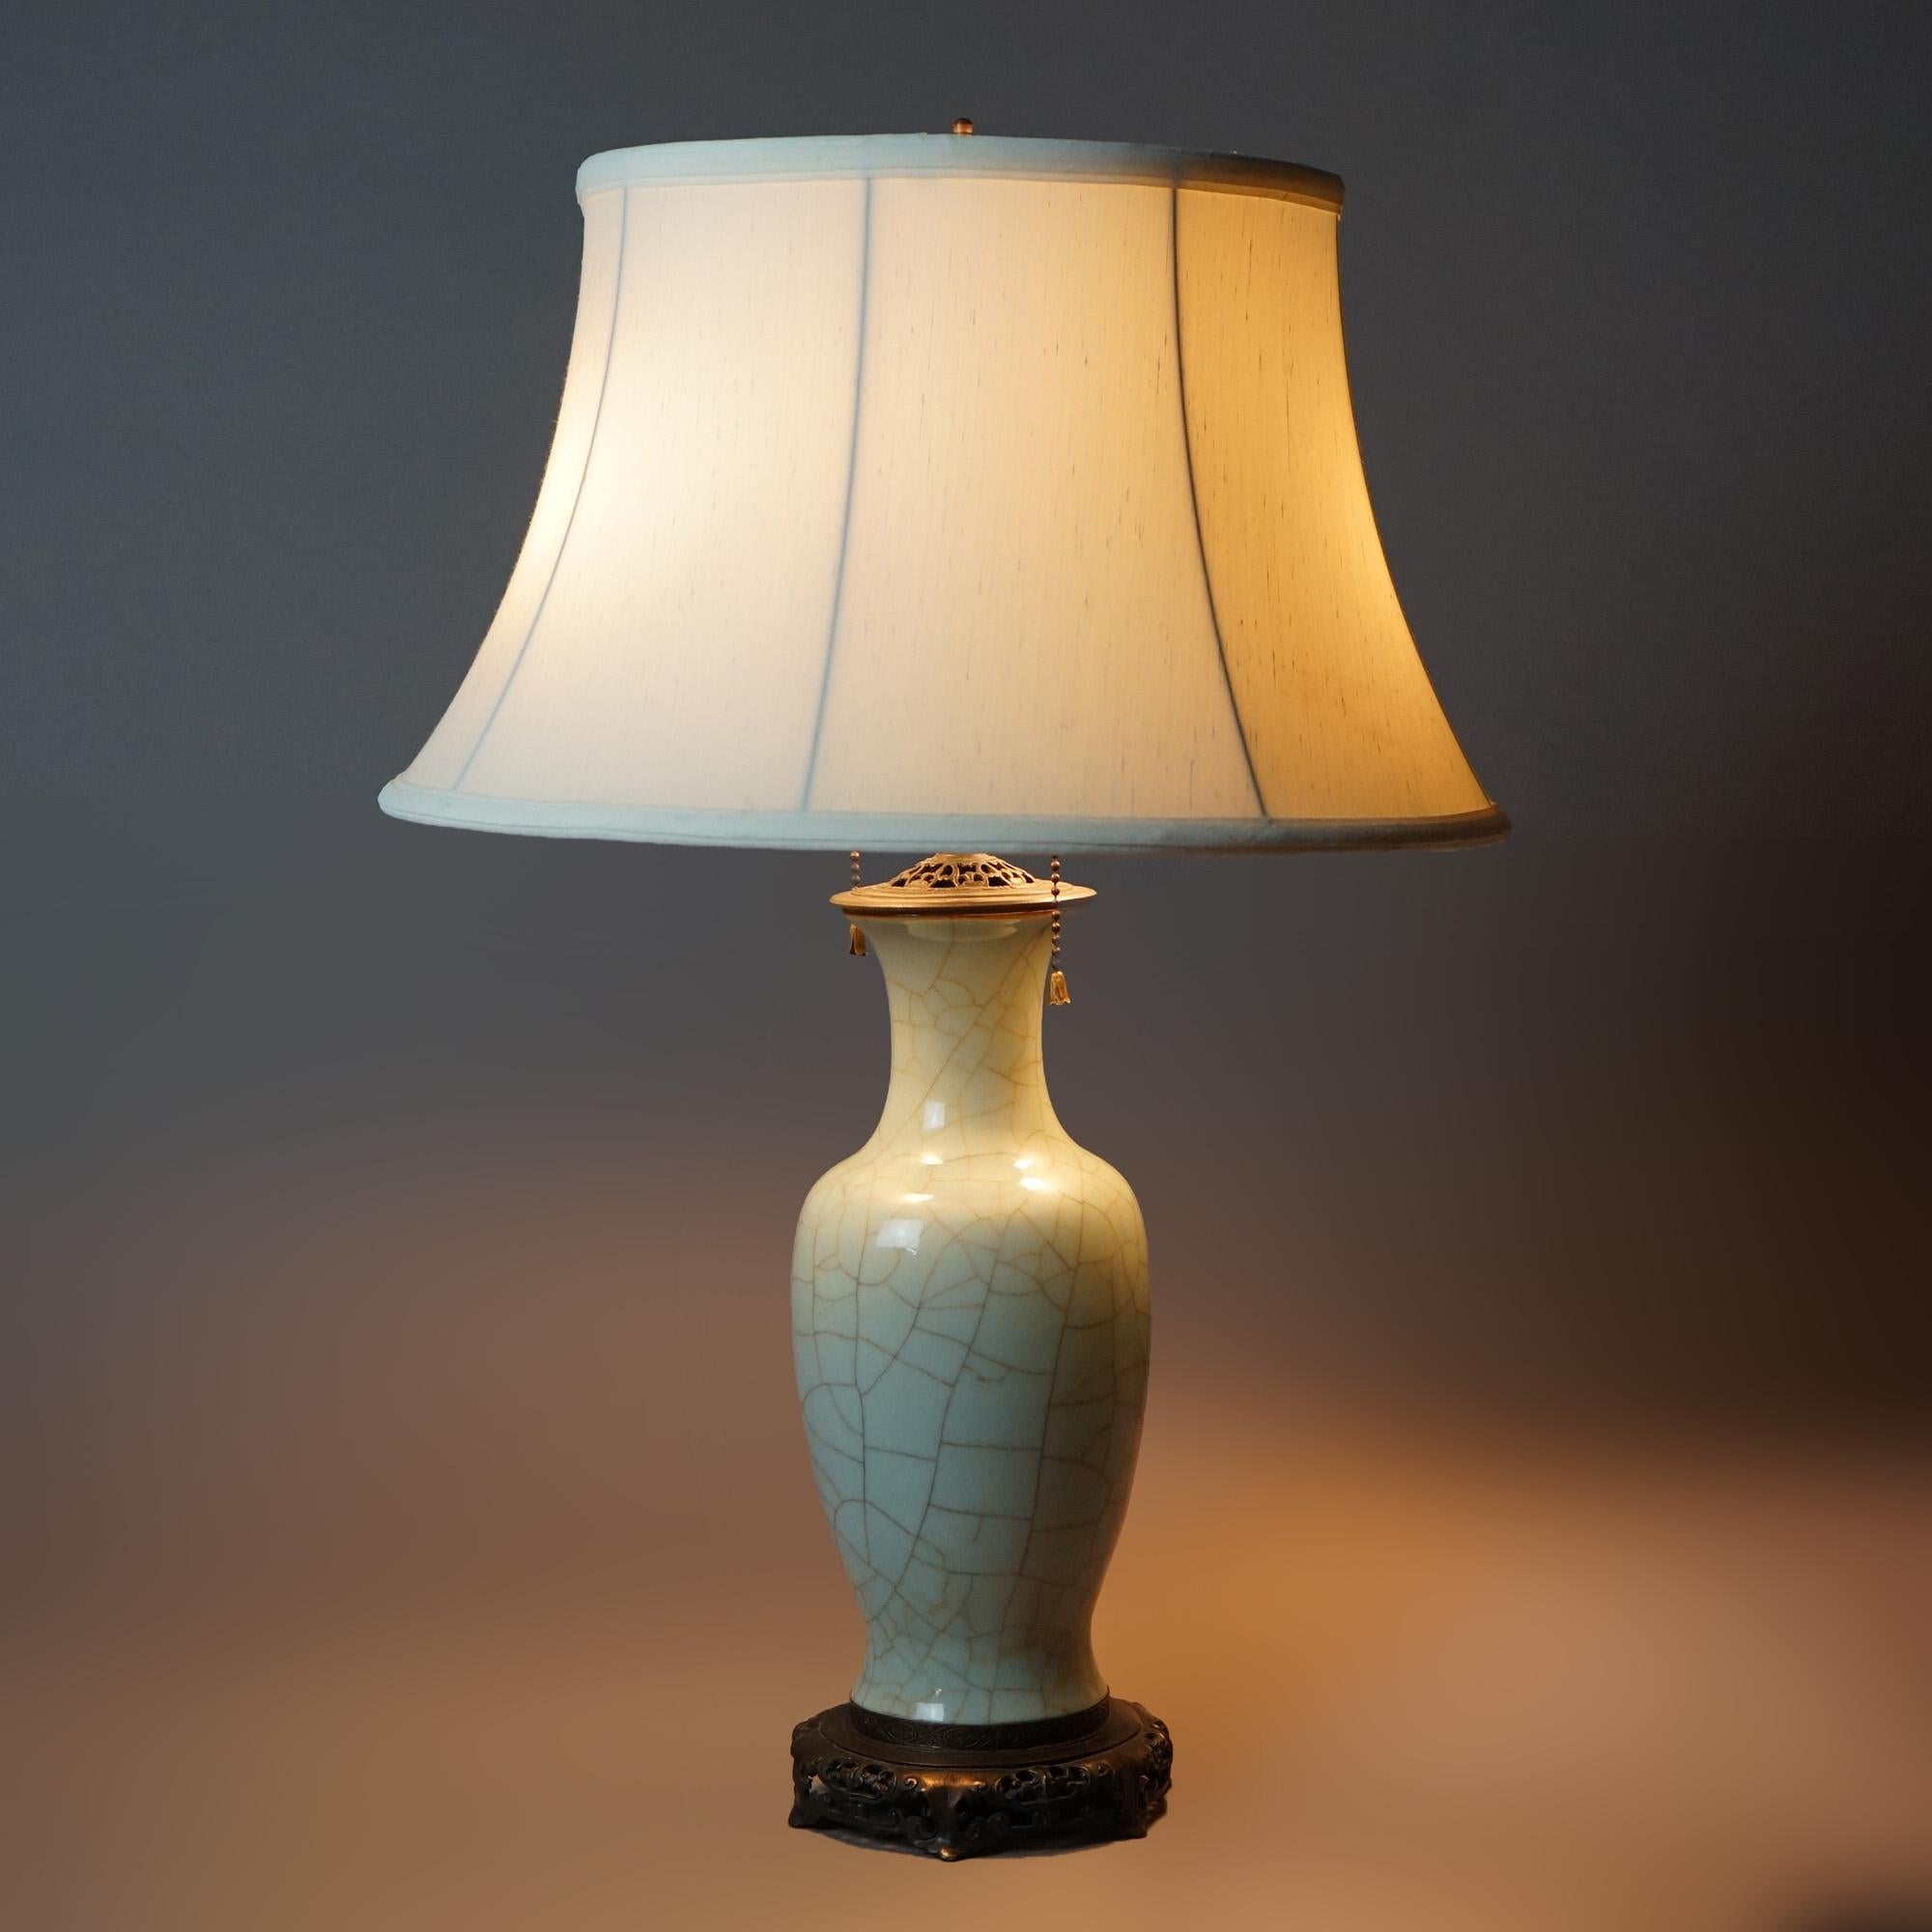 American Antique Chinese Crackled Celadon Glazed Art Pottery Table Lamp C1930